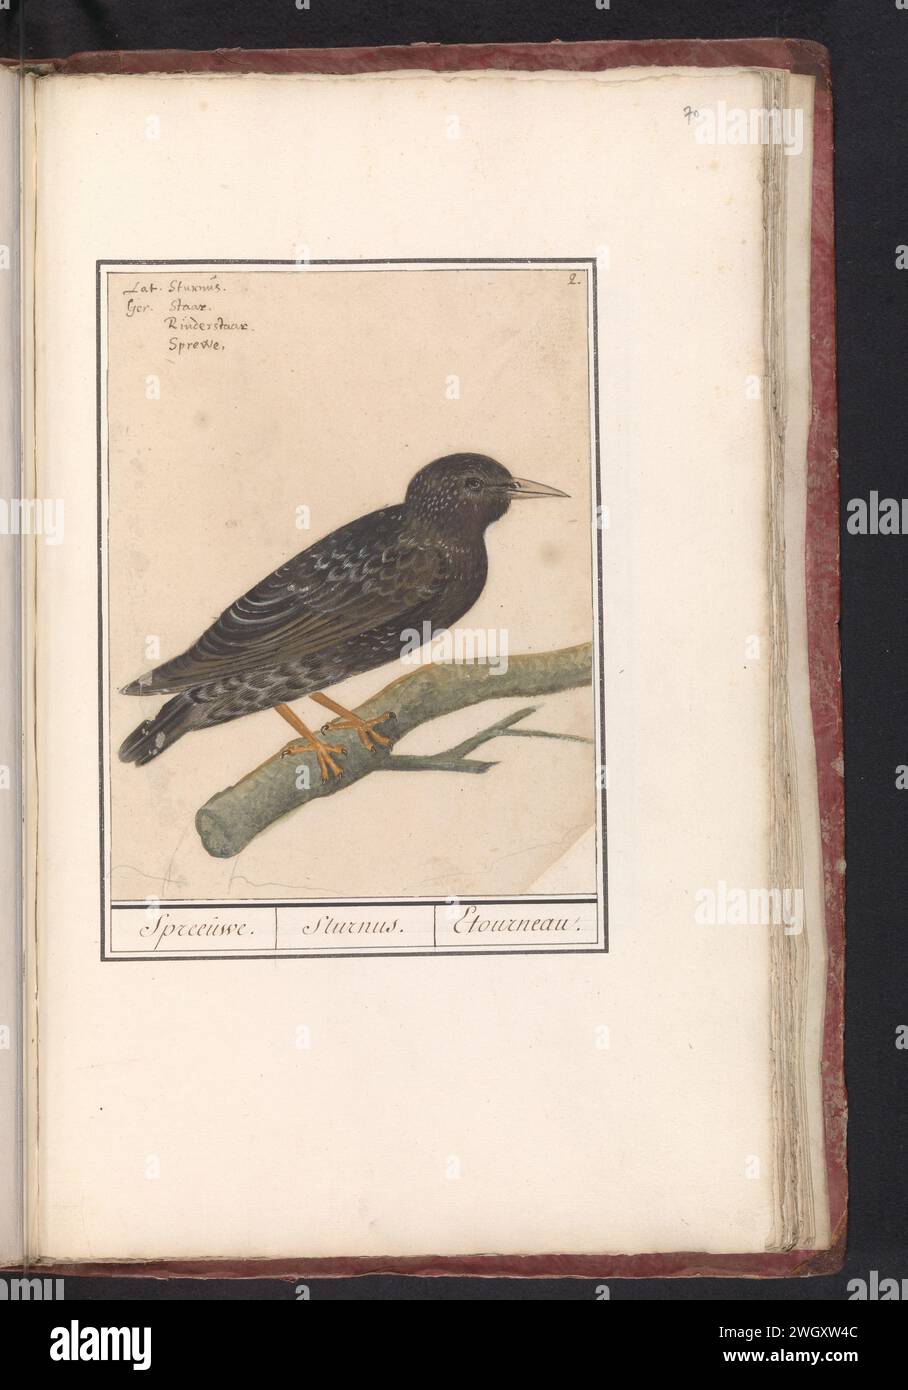 Starling (Sturnus Vulgaris), Anselmus Boëtius de Boodt, 1596 - 1610 drawing Starling. Numbered at the top right: 2. At the top left the name in four languages. Part of the first album with drawings of birds. Third of twelve albums with drawings of animals, birds and plants known around 1600, commissioned by Emperor Rudolf II. With explanation in Dutch, Latin and French. draughtsman: Praagdraughtsman: Delft paper. watercolor (paint). deck paint. pencil. ink brush / pen song-birds: starling Stock Photo